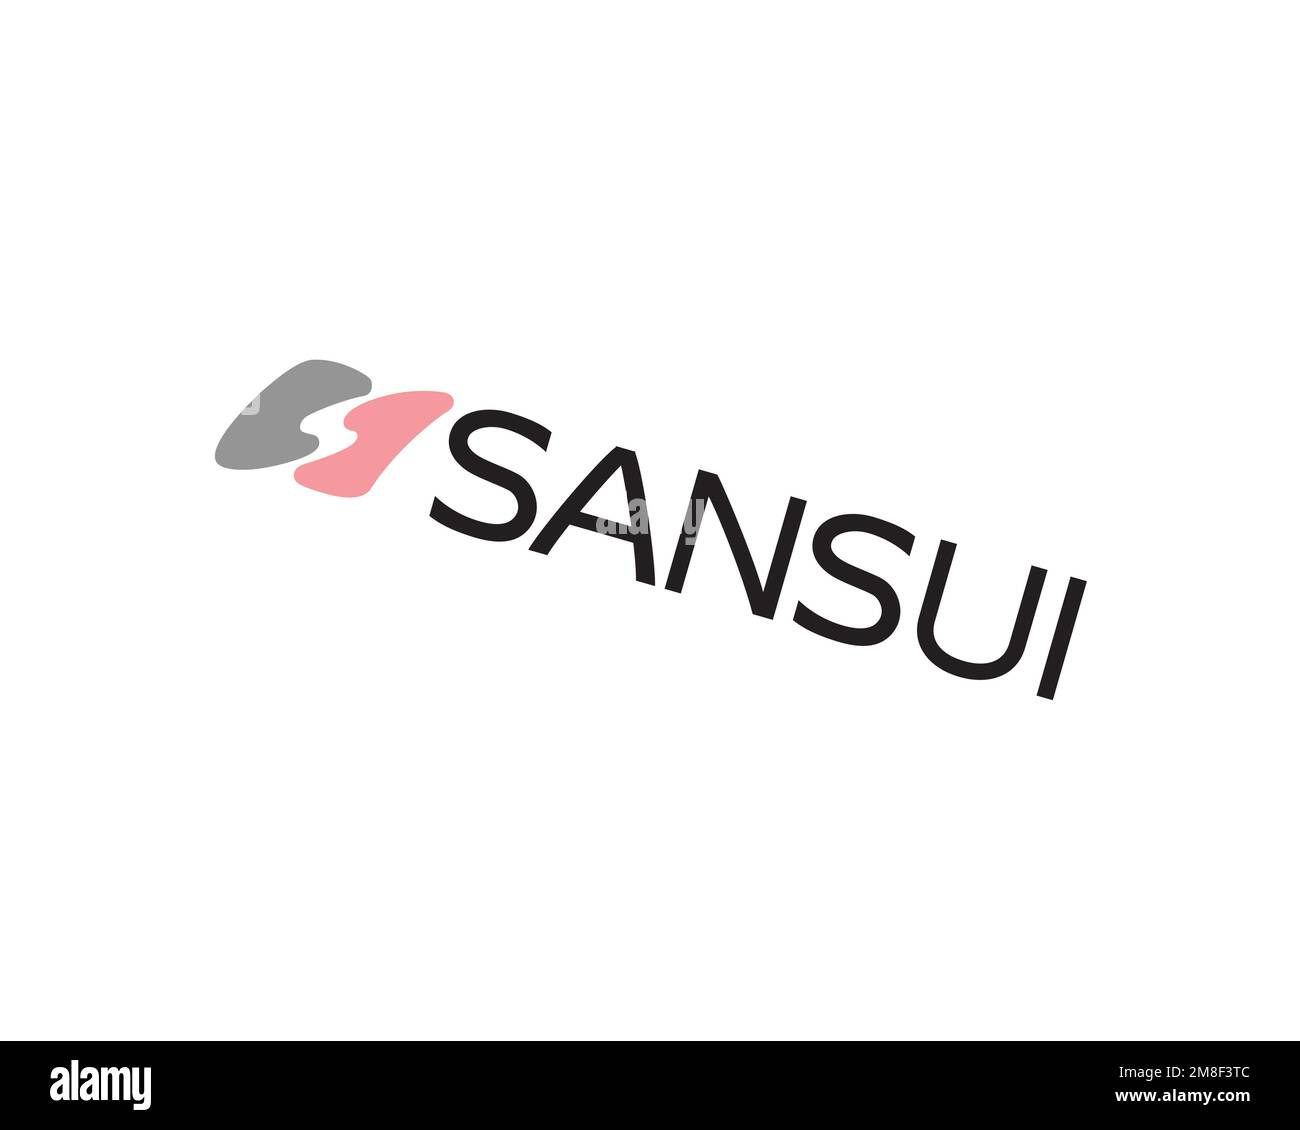 Sansui eyes revenue of Rs 2,500 cr from TV segment in 2017 - India Retailing